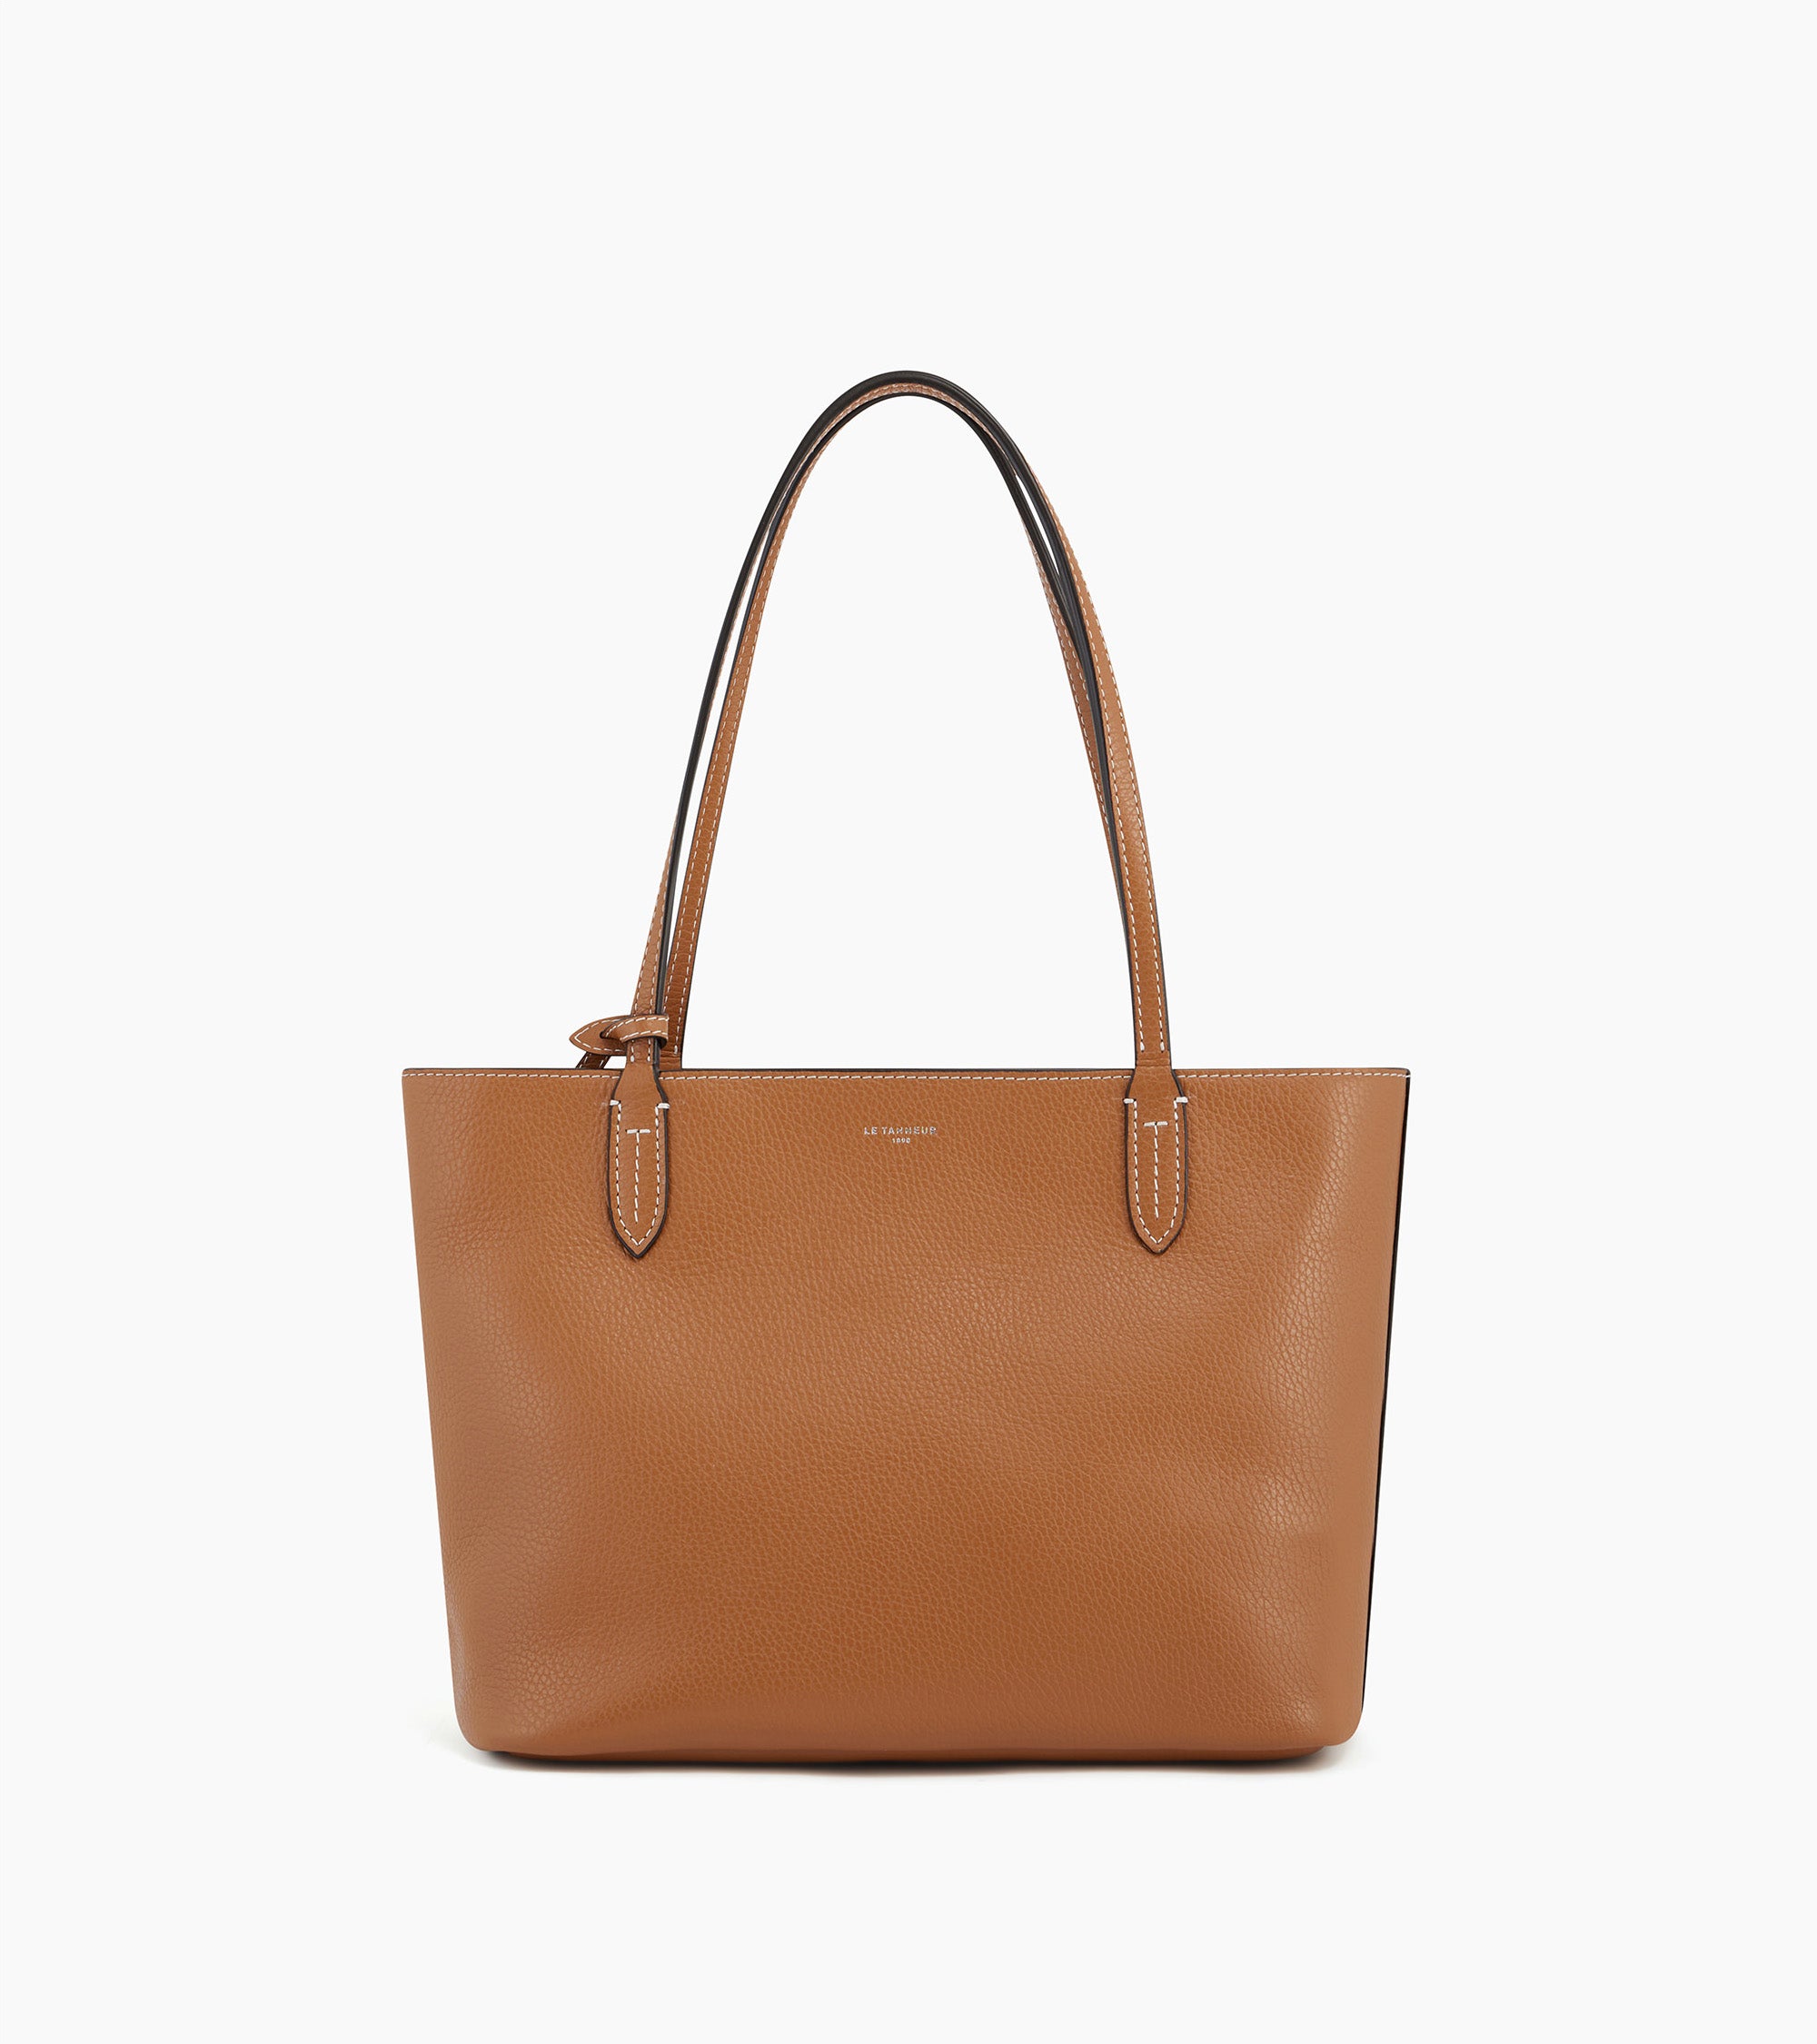 Louise small tote bag in pebbled leather